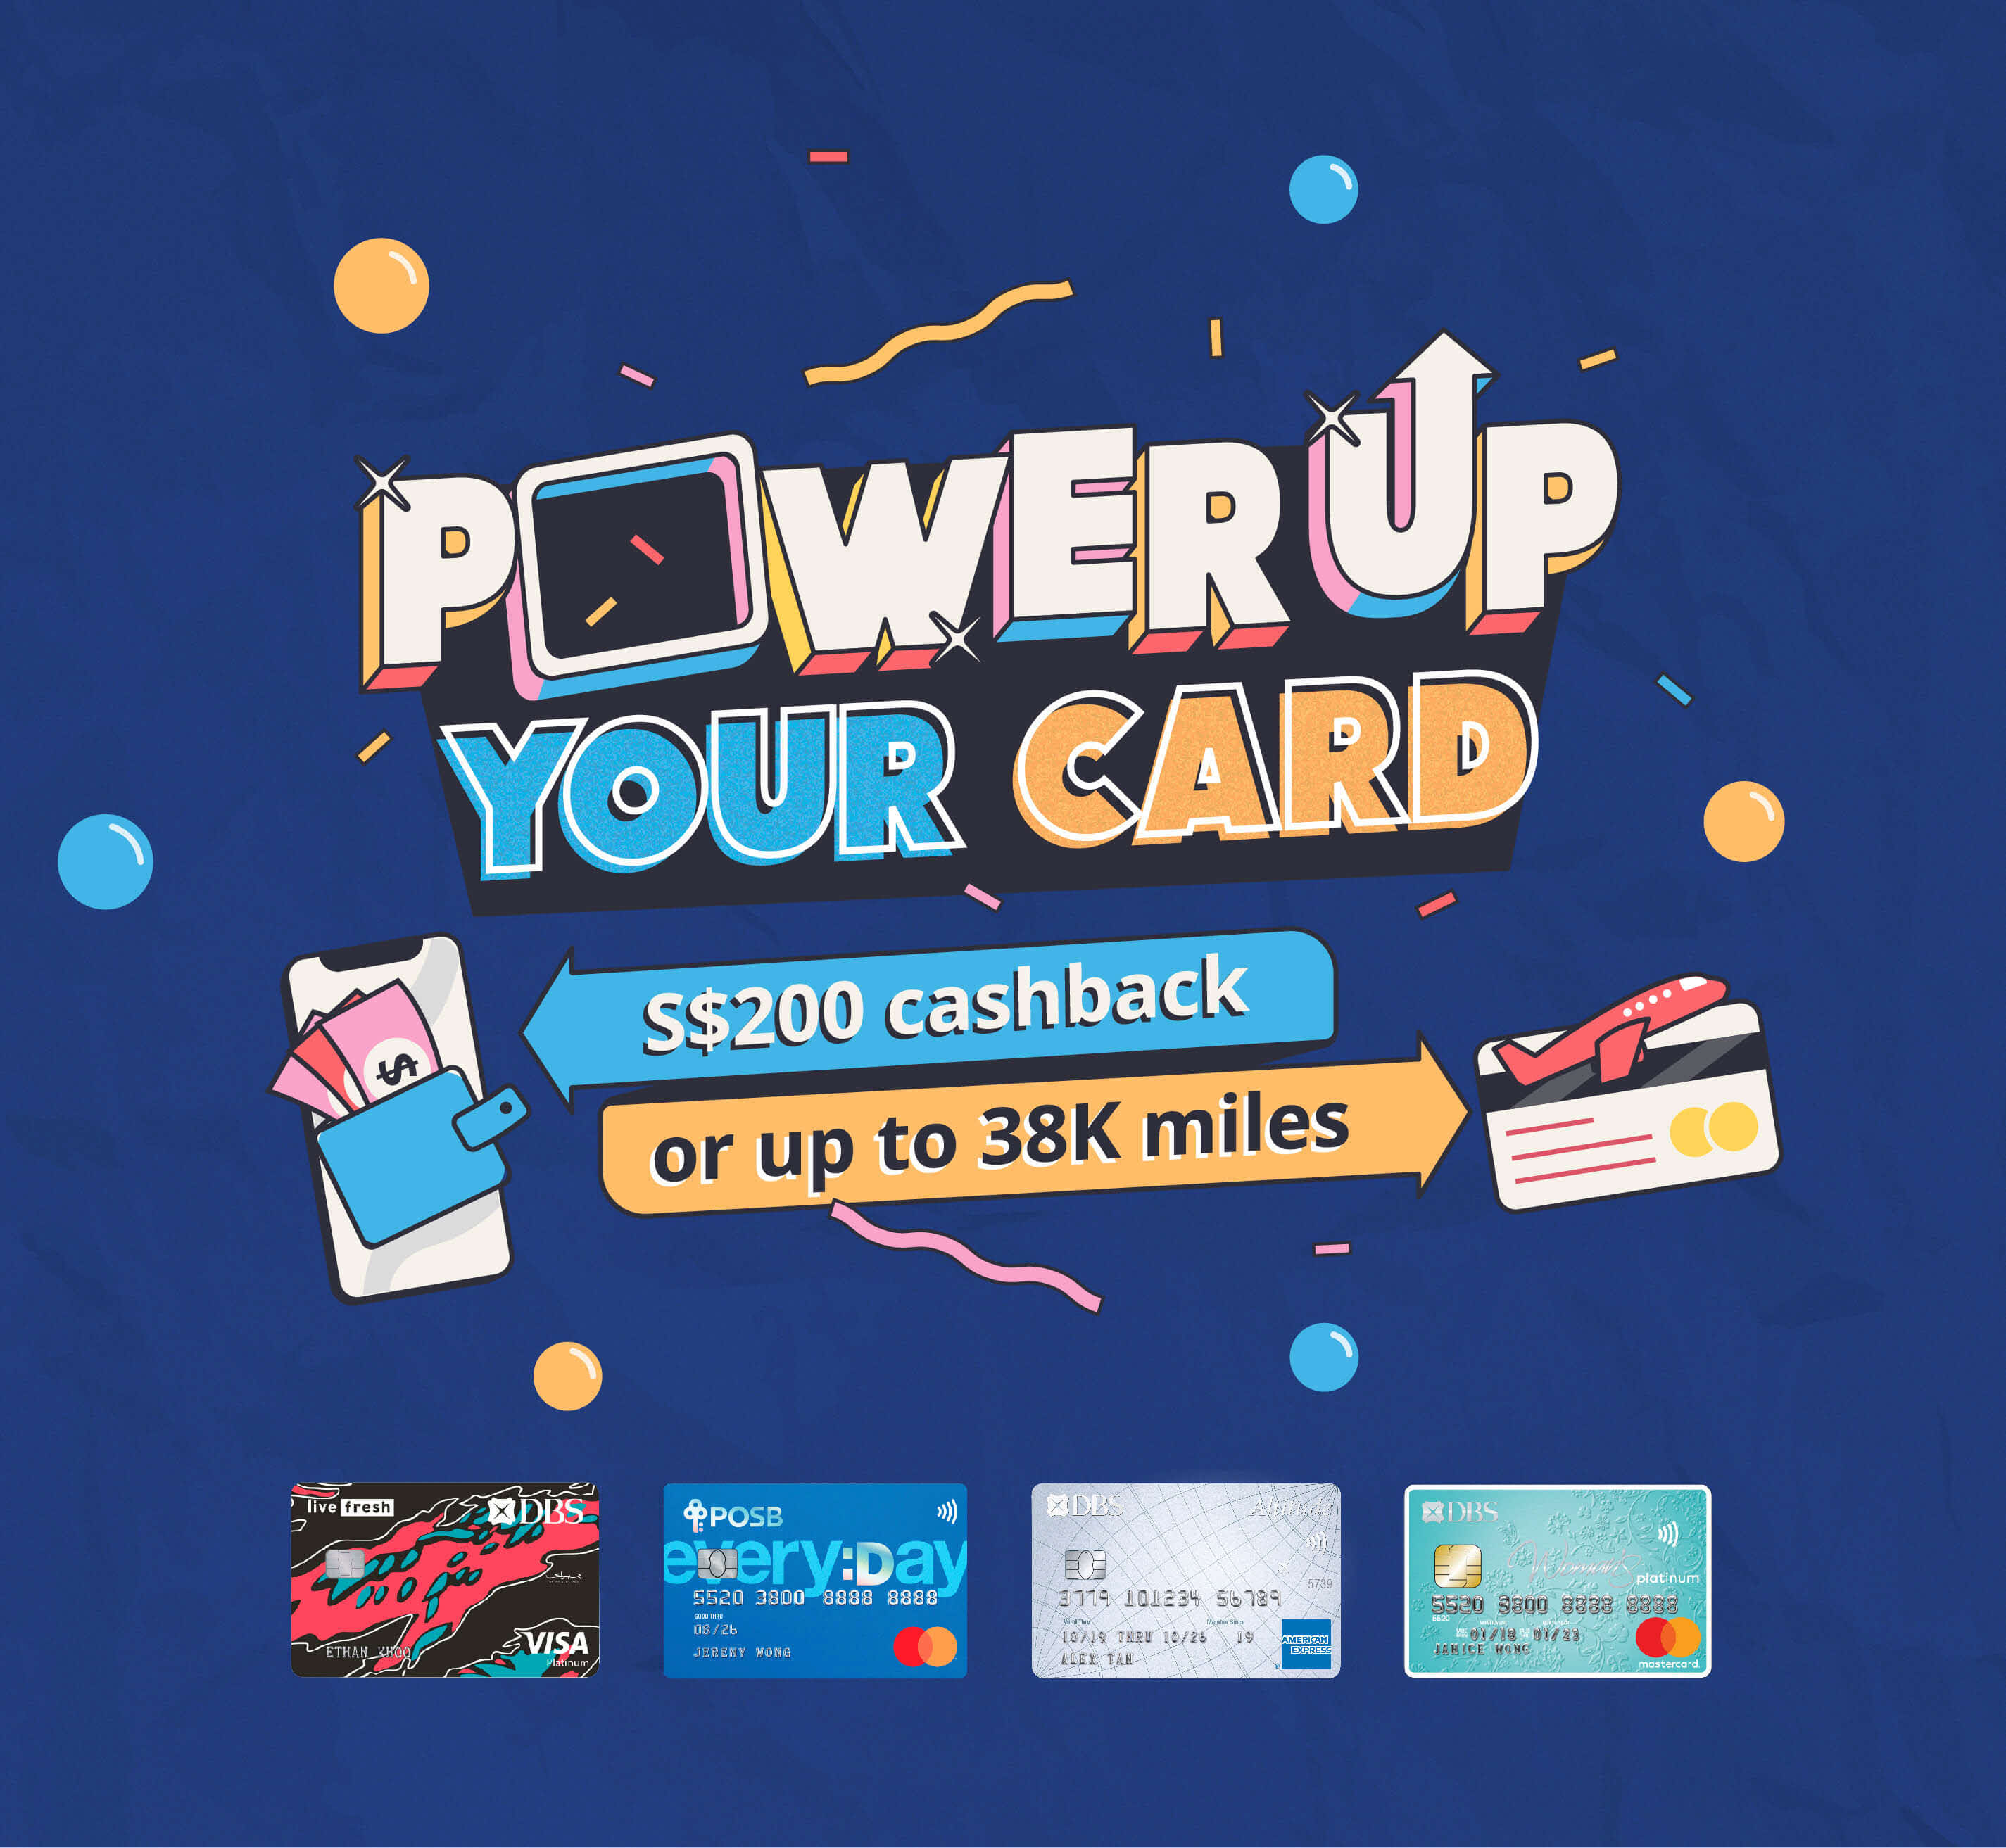 Get powered up with cashback and miles!